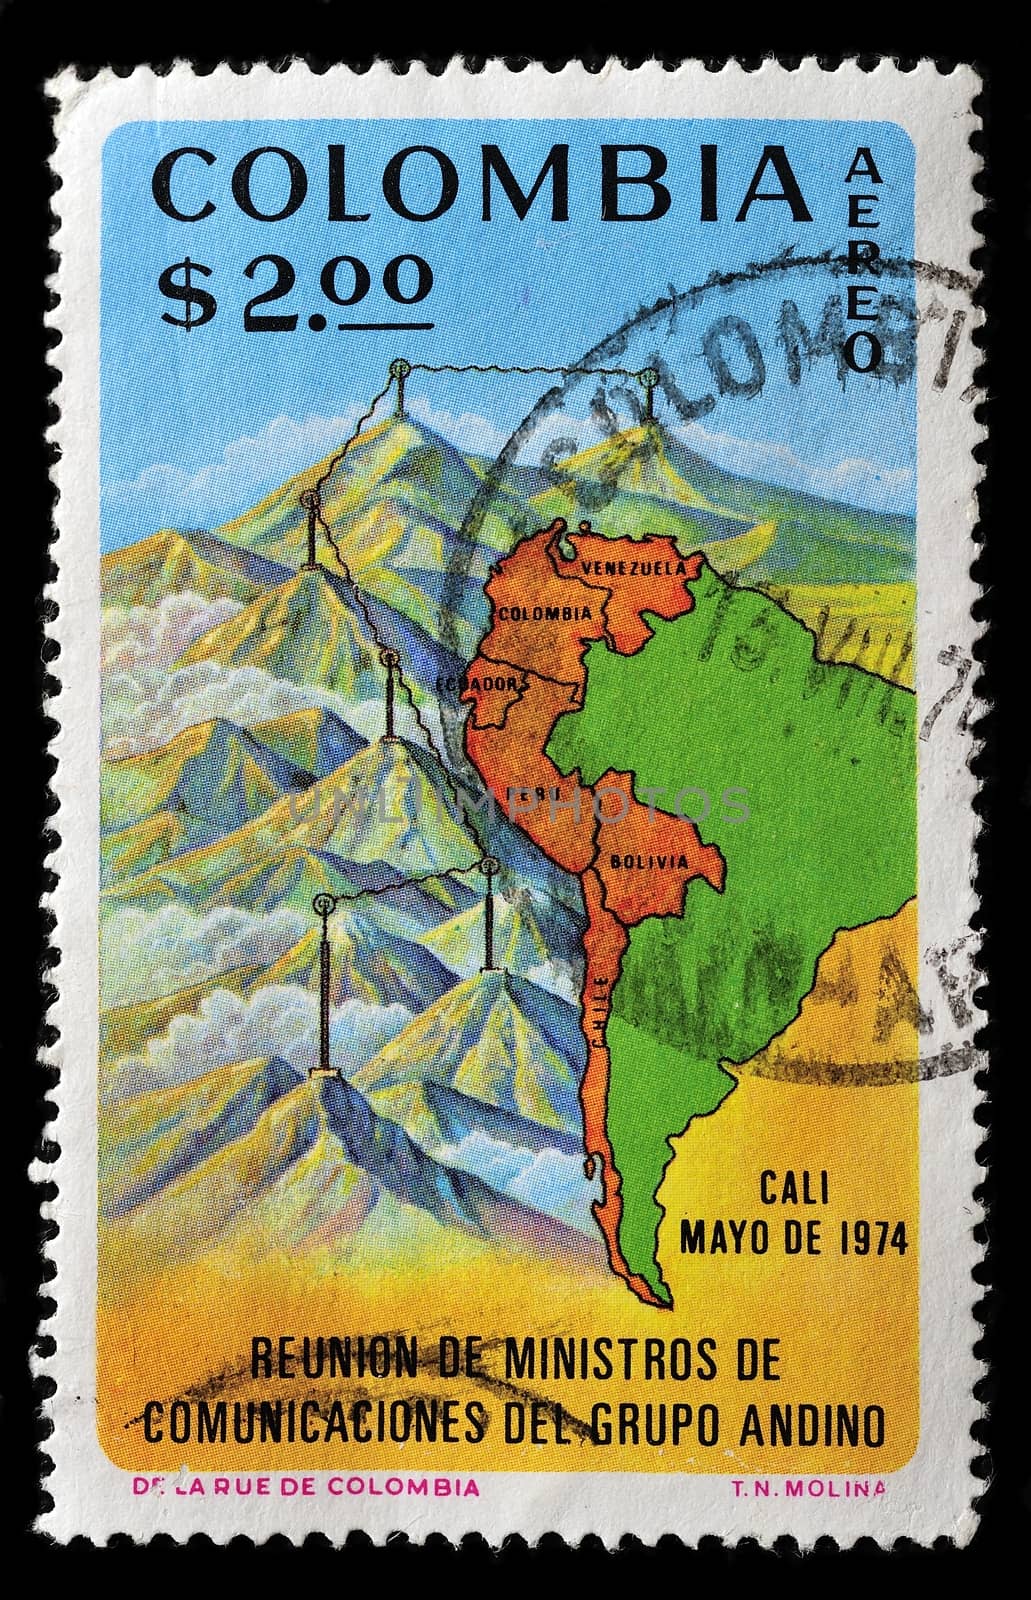 COLOMBIA - CIRCA 1974: A stamp printed in Colombia shows image of a map of Colombia, series, circa 1974